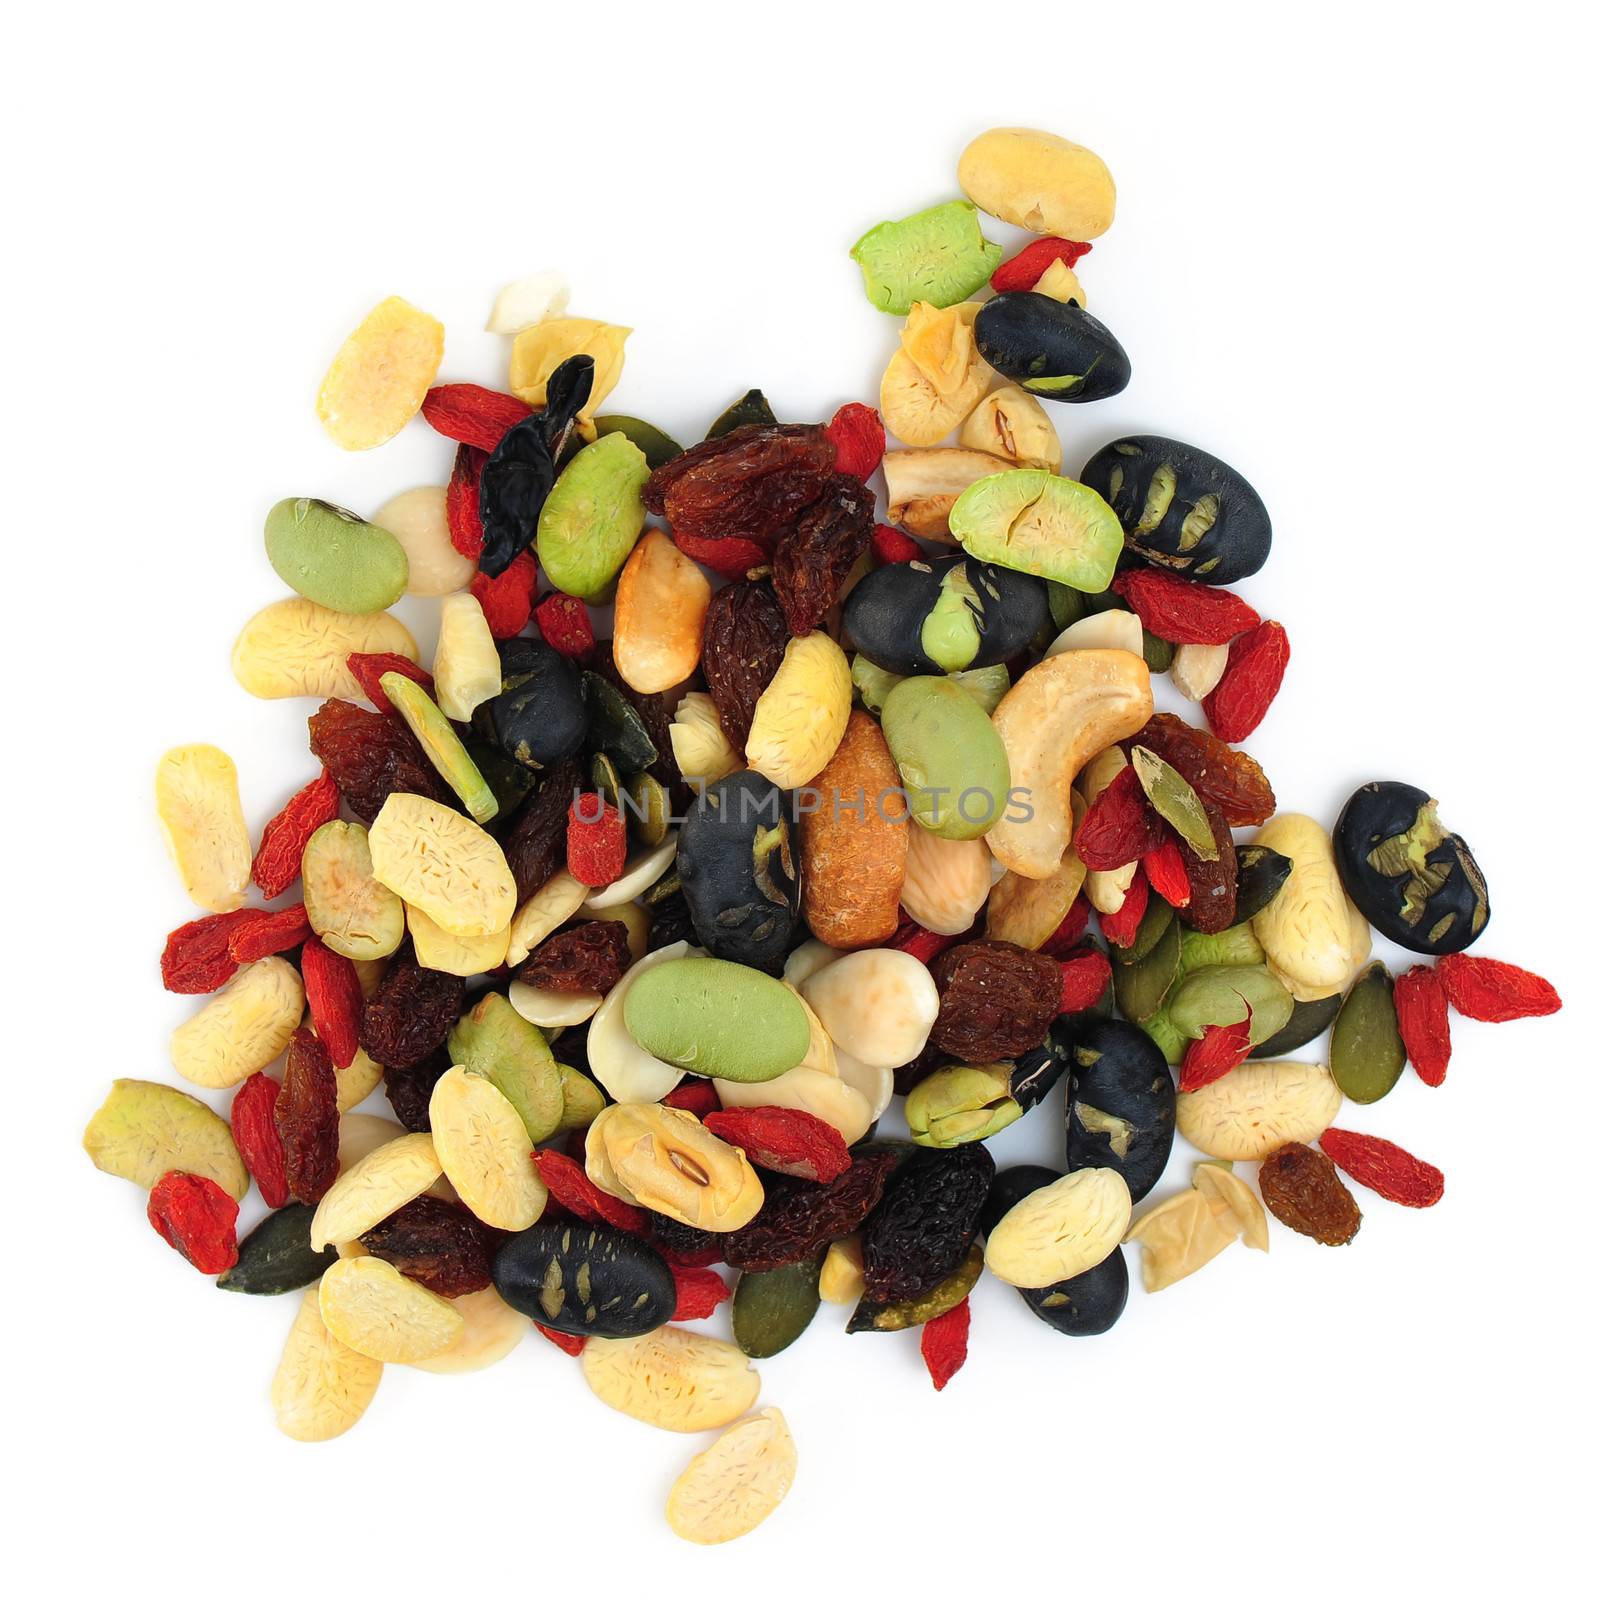 Mixed nuts and dry fruits